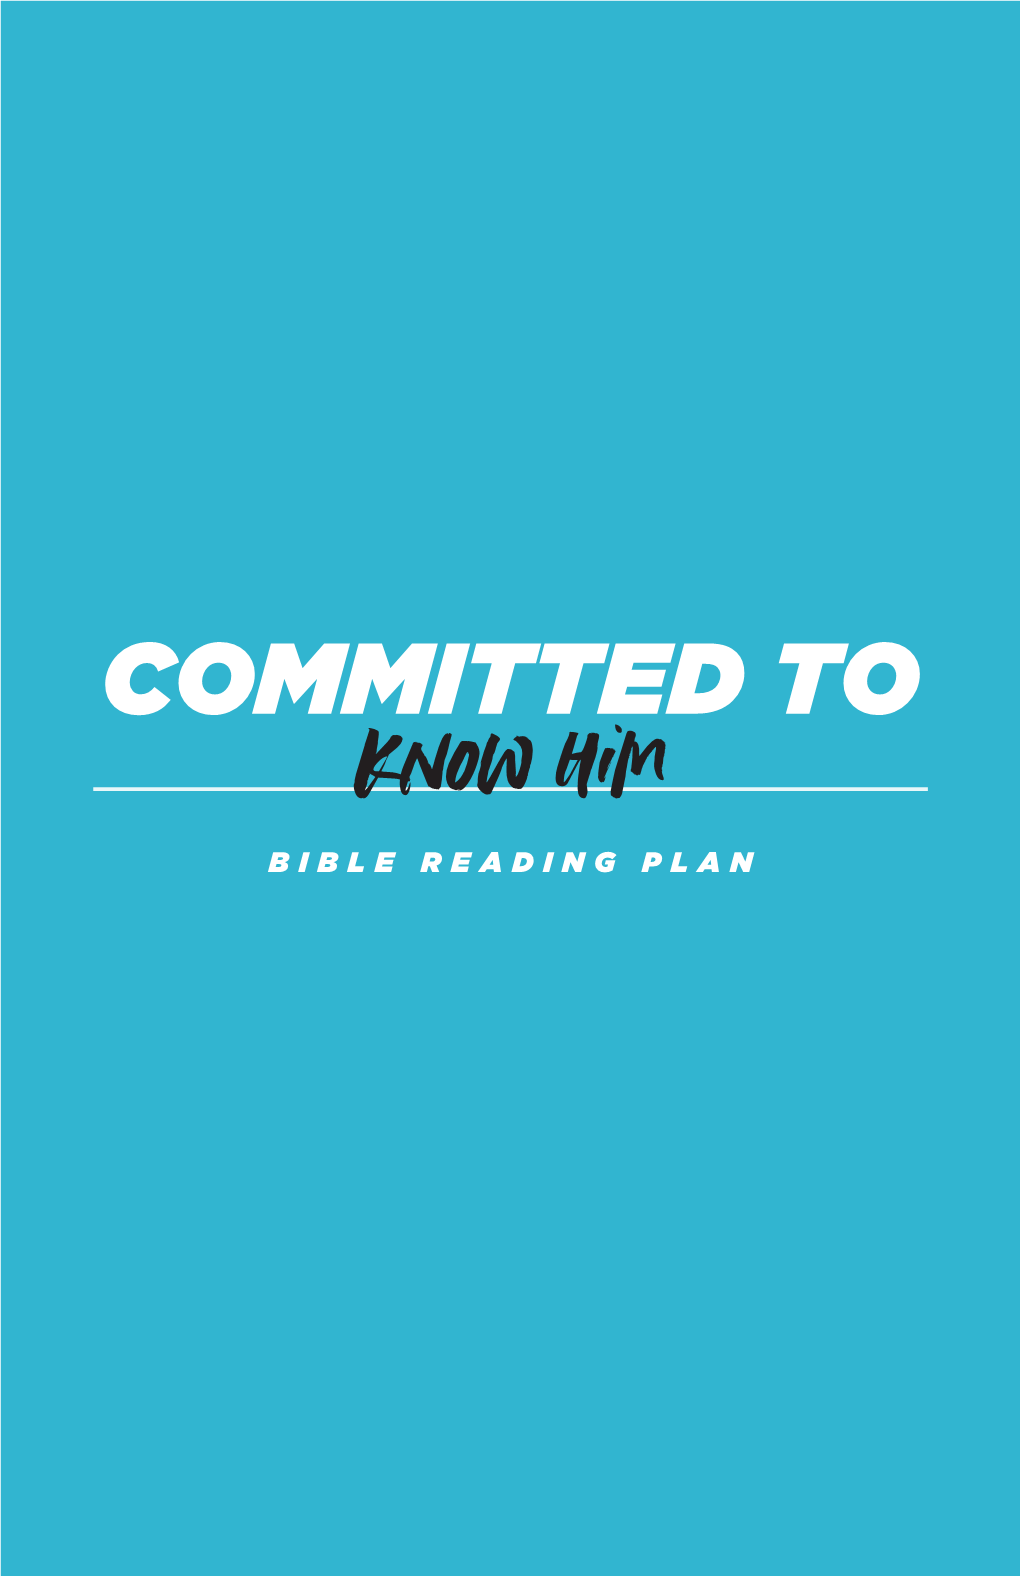 Committed to Know Him BIBLE READING PLAN